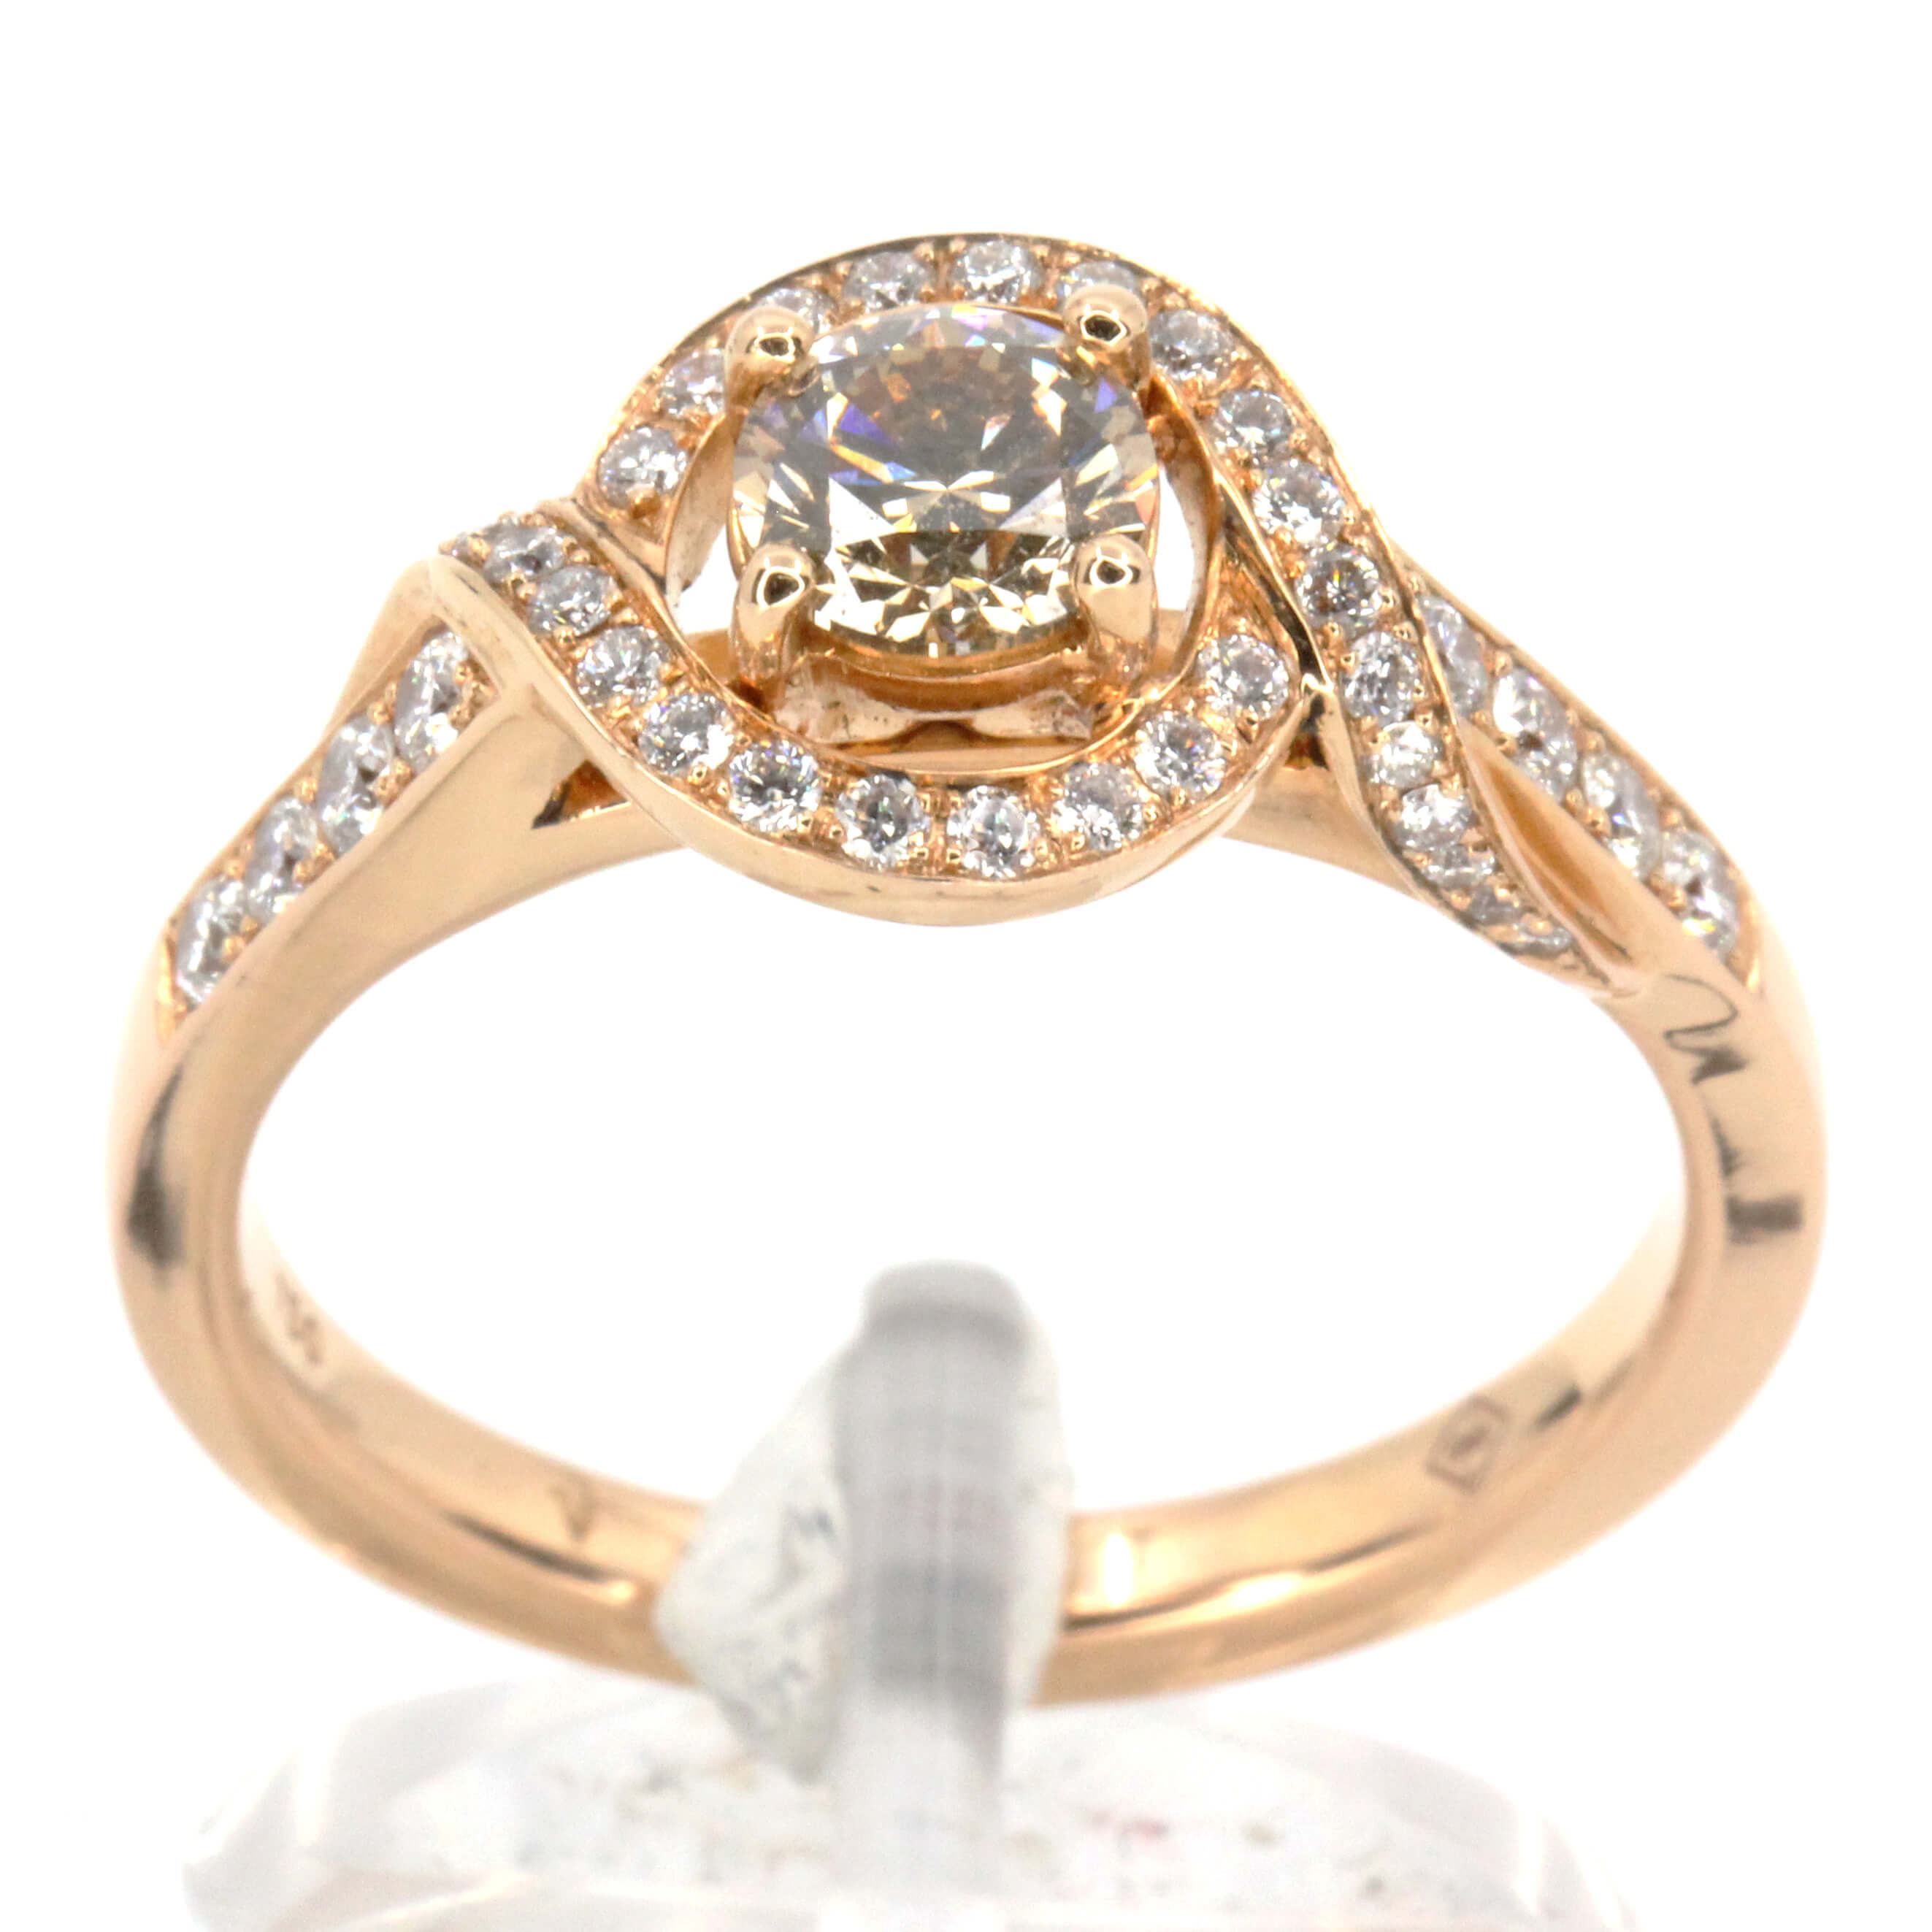 Round Brilliant Cut Champagne Diamond Ring with Halo of Diamonds set in 18ct Rose Gold | All Gem ...